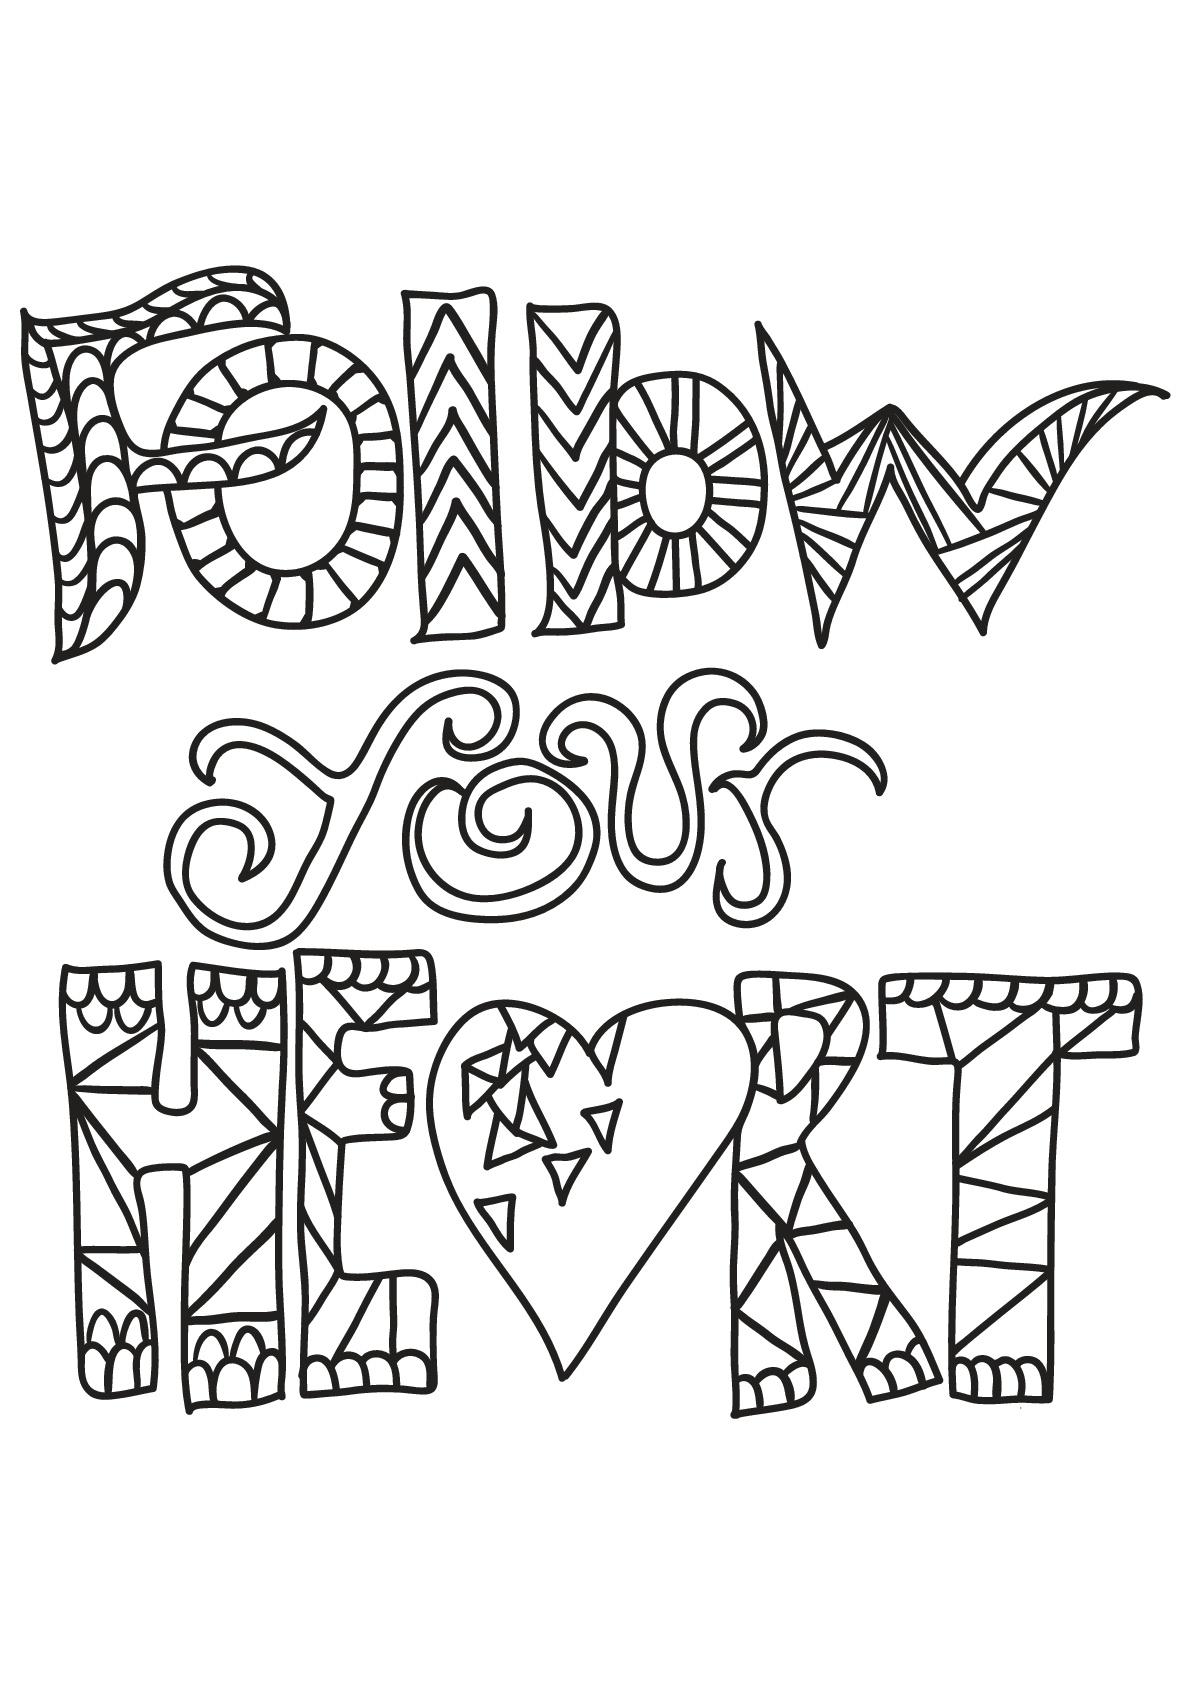 Download Free book quote 6 - Quotes Adult Coloring Pages